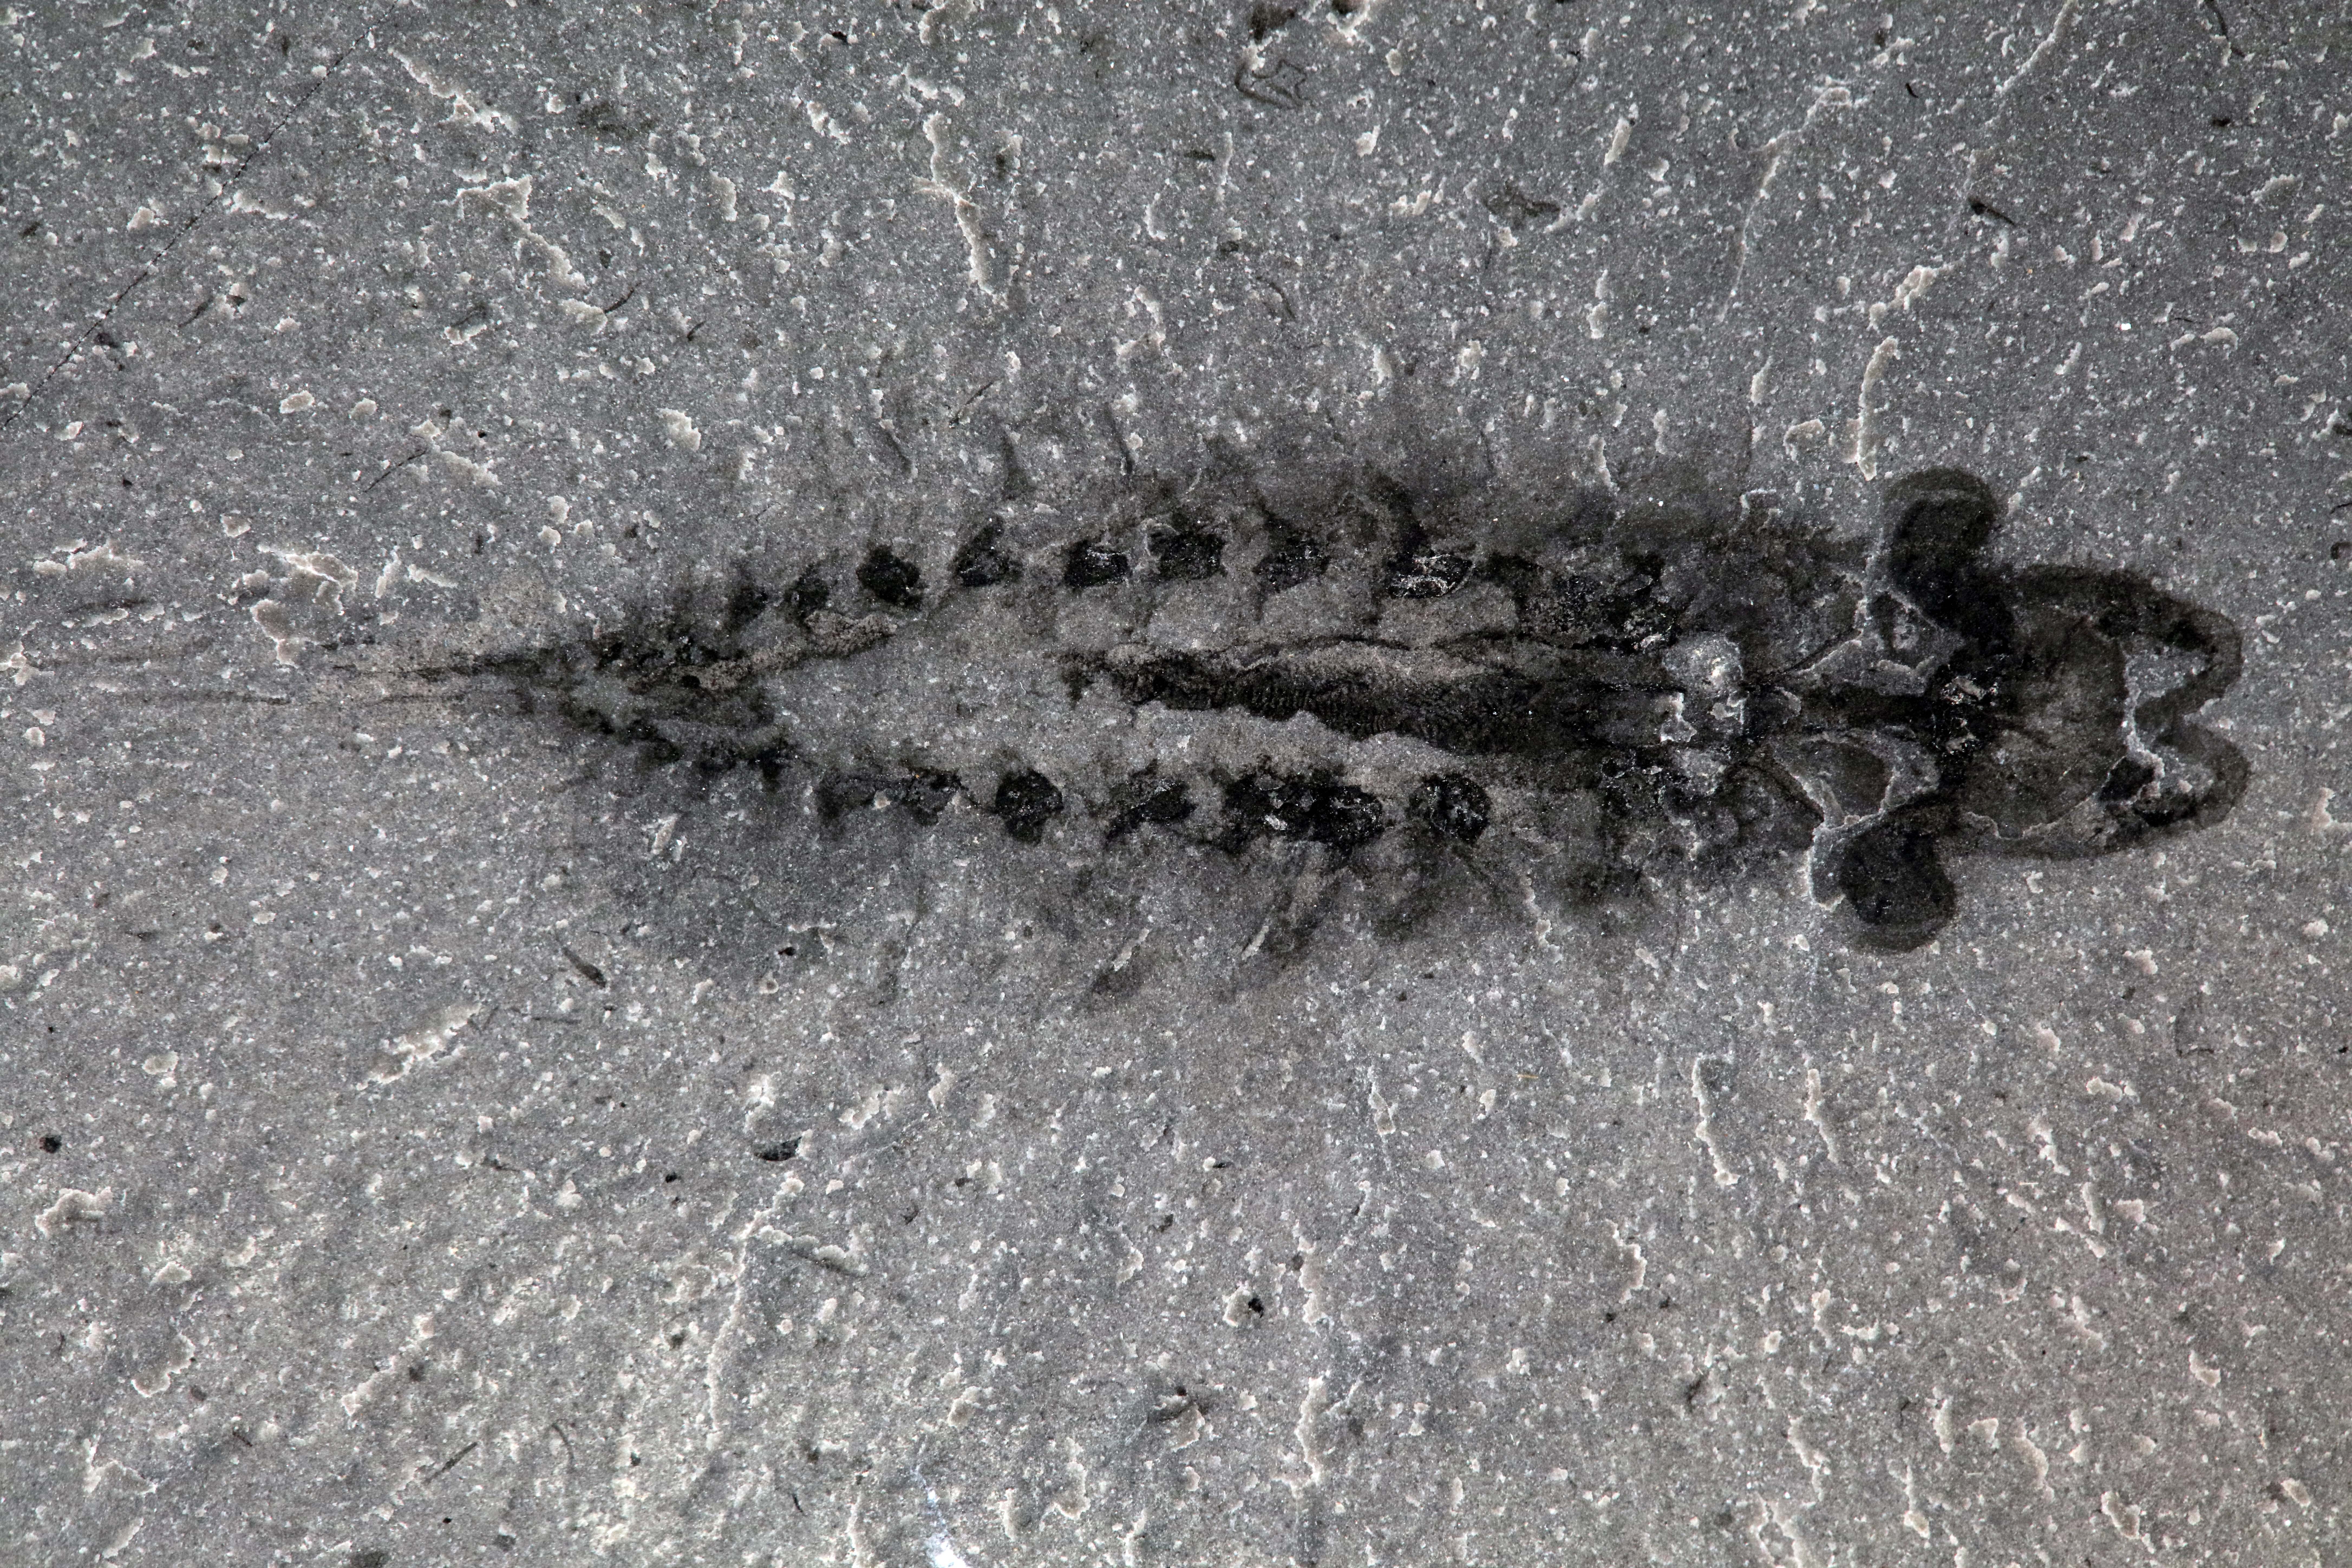 A fossil of Stanleycaris, showing the head on the right and multisegmented body extending to the left. The eyes are large and situated on stalks. A pair of claws extend forward from the head and a circular mouth is visible. Inside the body we can see remains of the gut and nervous tissues